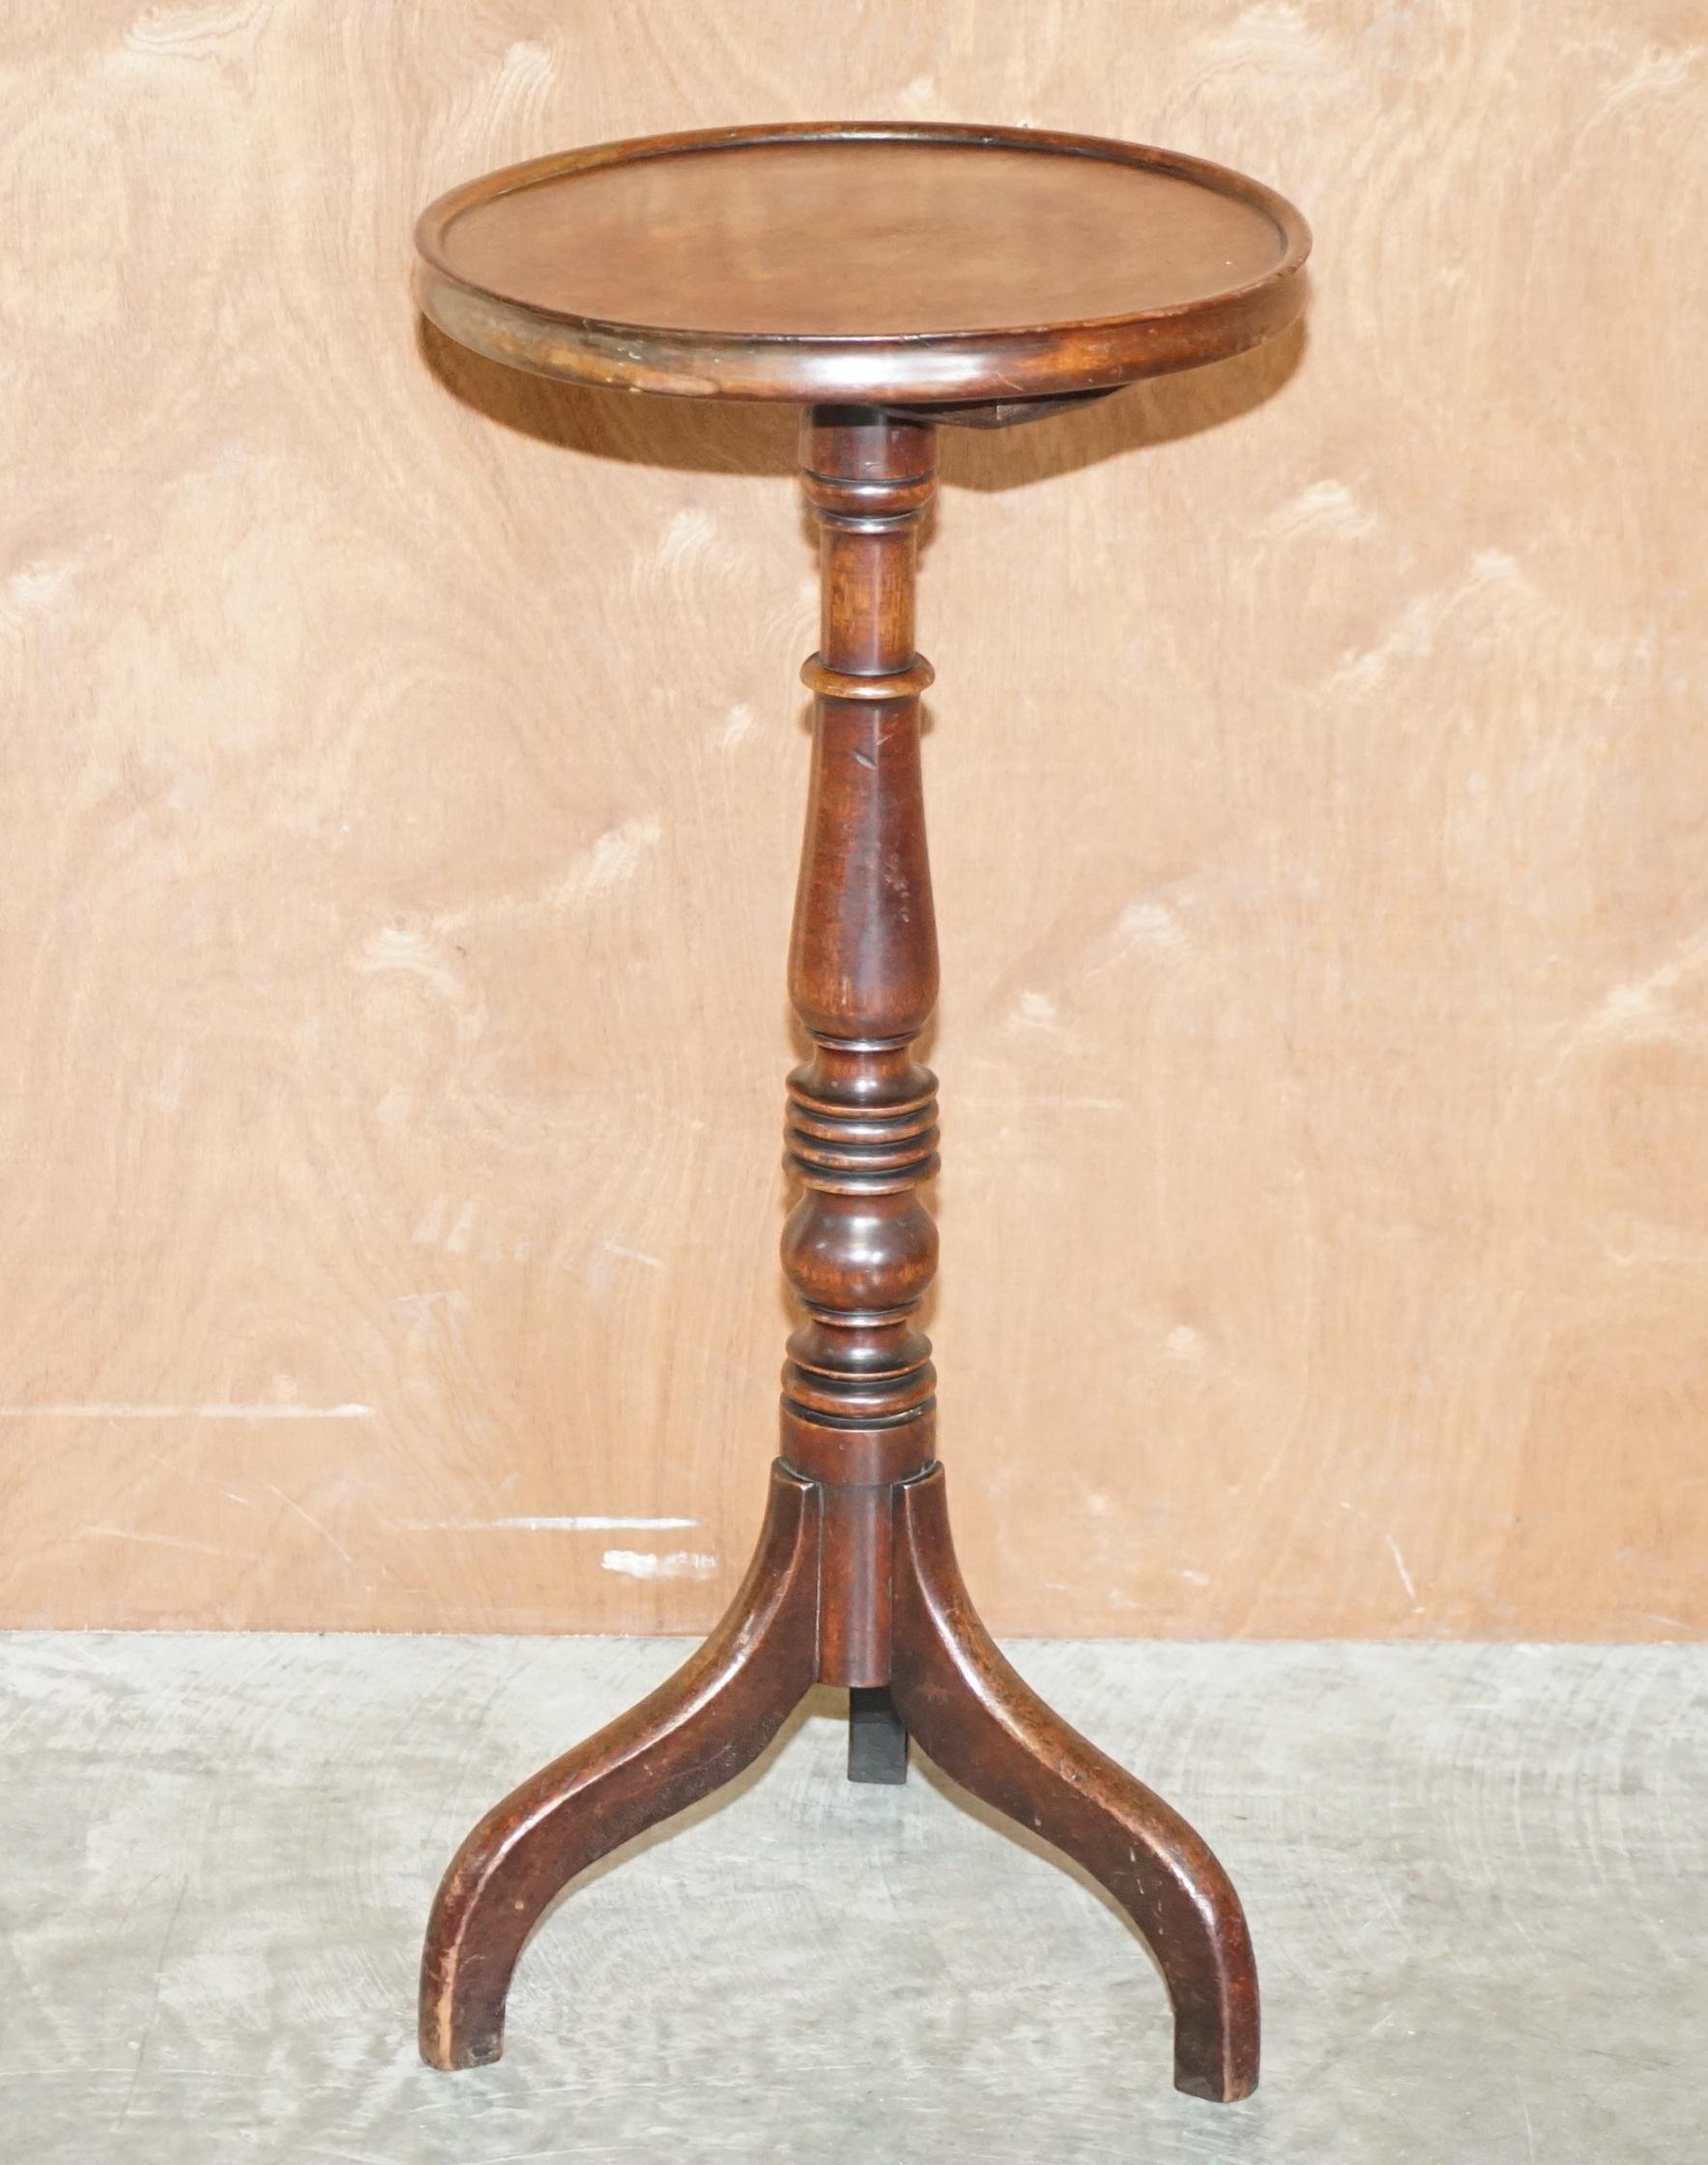 We are delighted to offer this stunning original Victorian hand carved mahogany tall side table or Jardinière plant stand 

A very decorative and good looking piece, its solid mahogany, designed to use for a lamp or glass of wine or possibly to